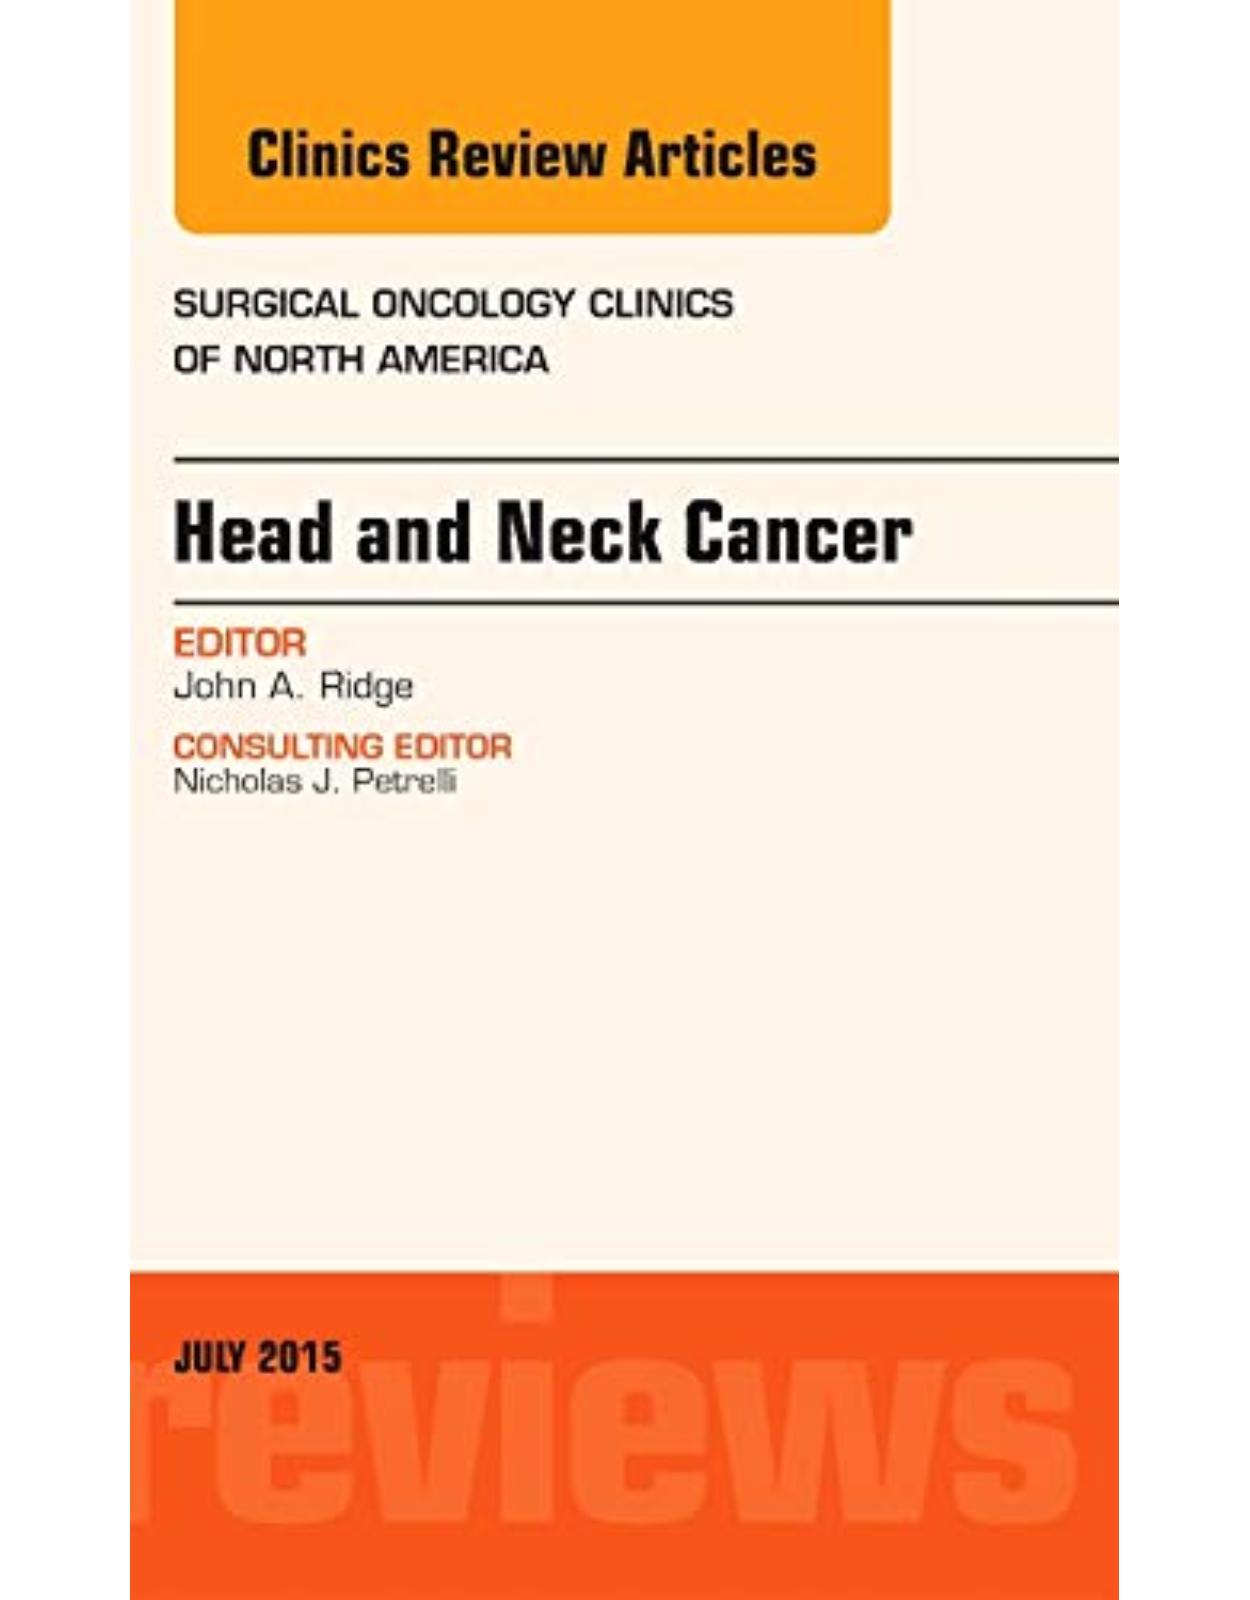 Head and Neck Cancer, An Issue of Surgical Oncology Clinics of North America, Volume 24-3